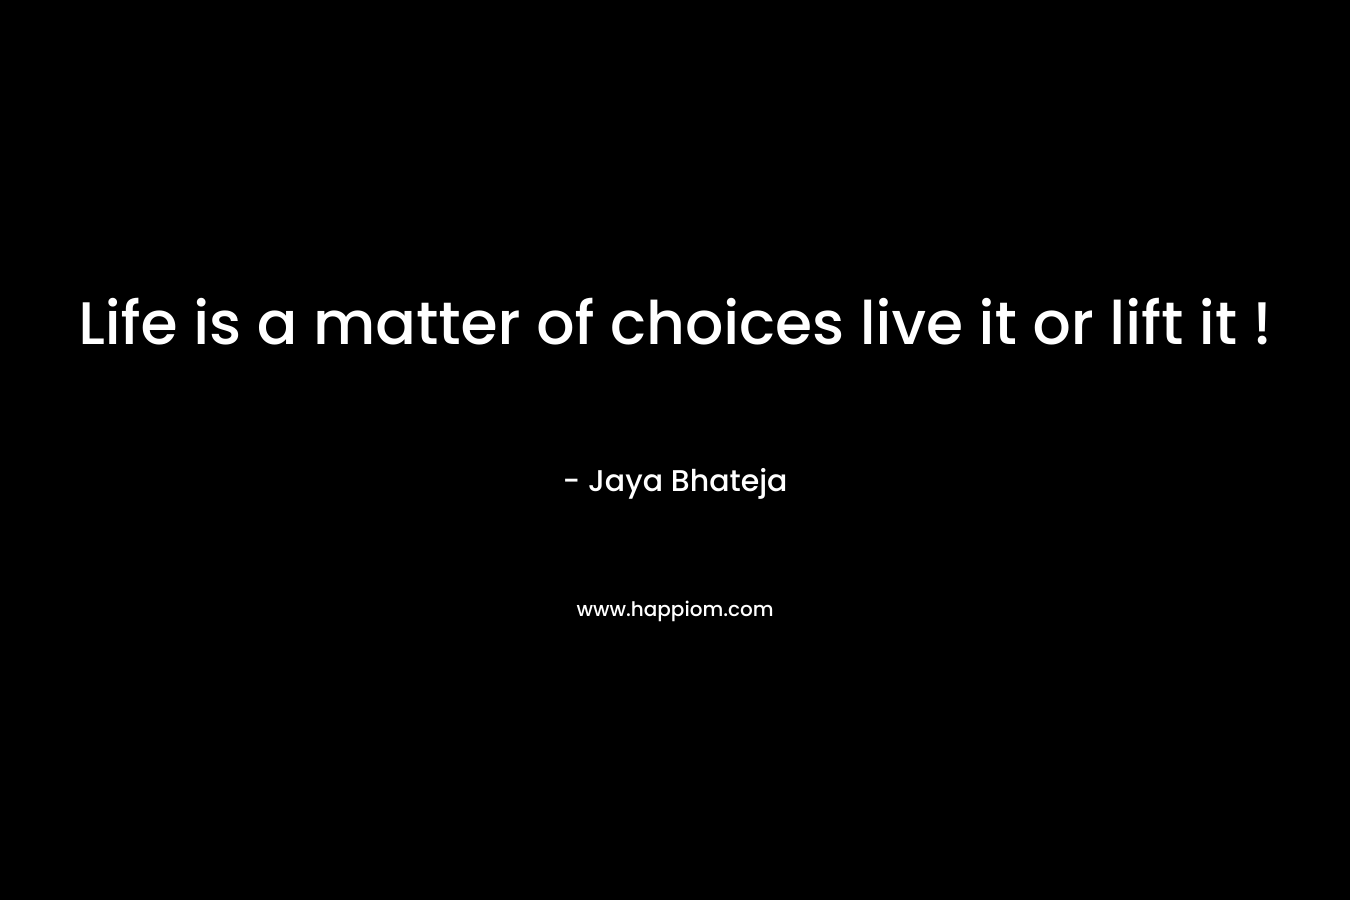 Life is a matter of choices live it or lift it !